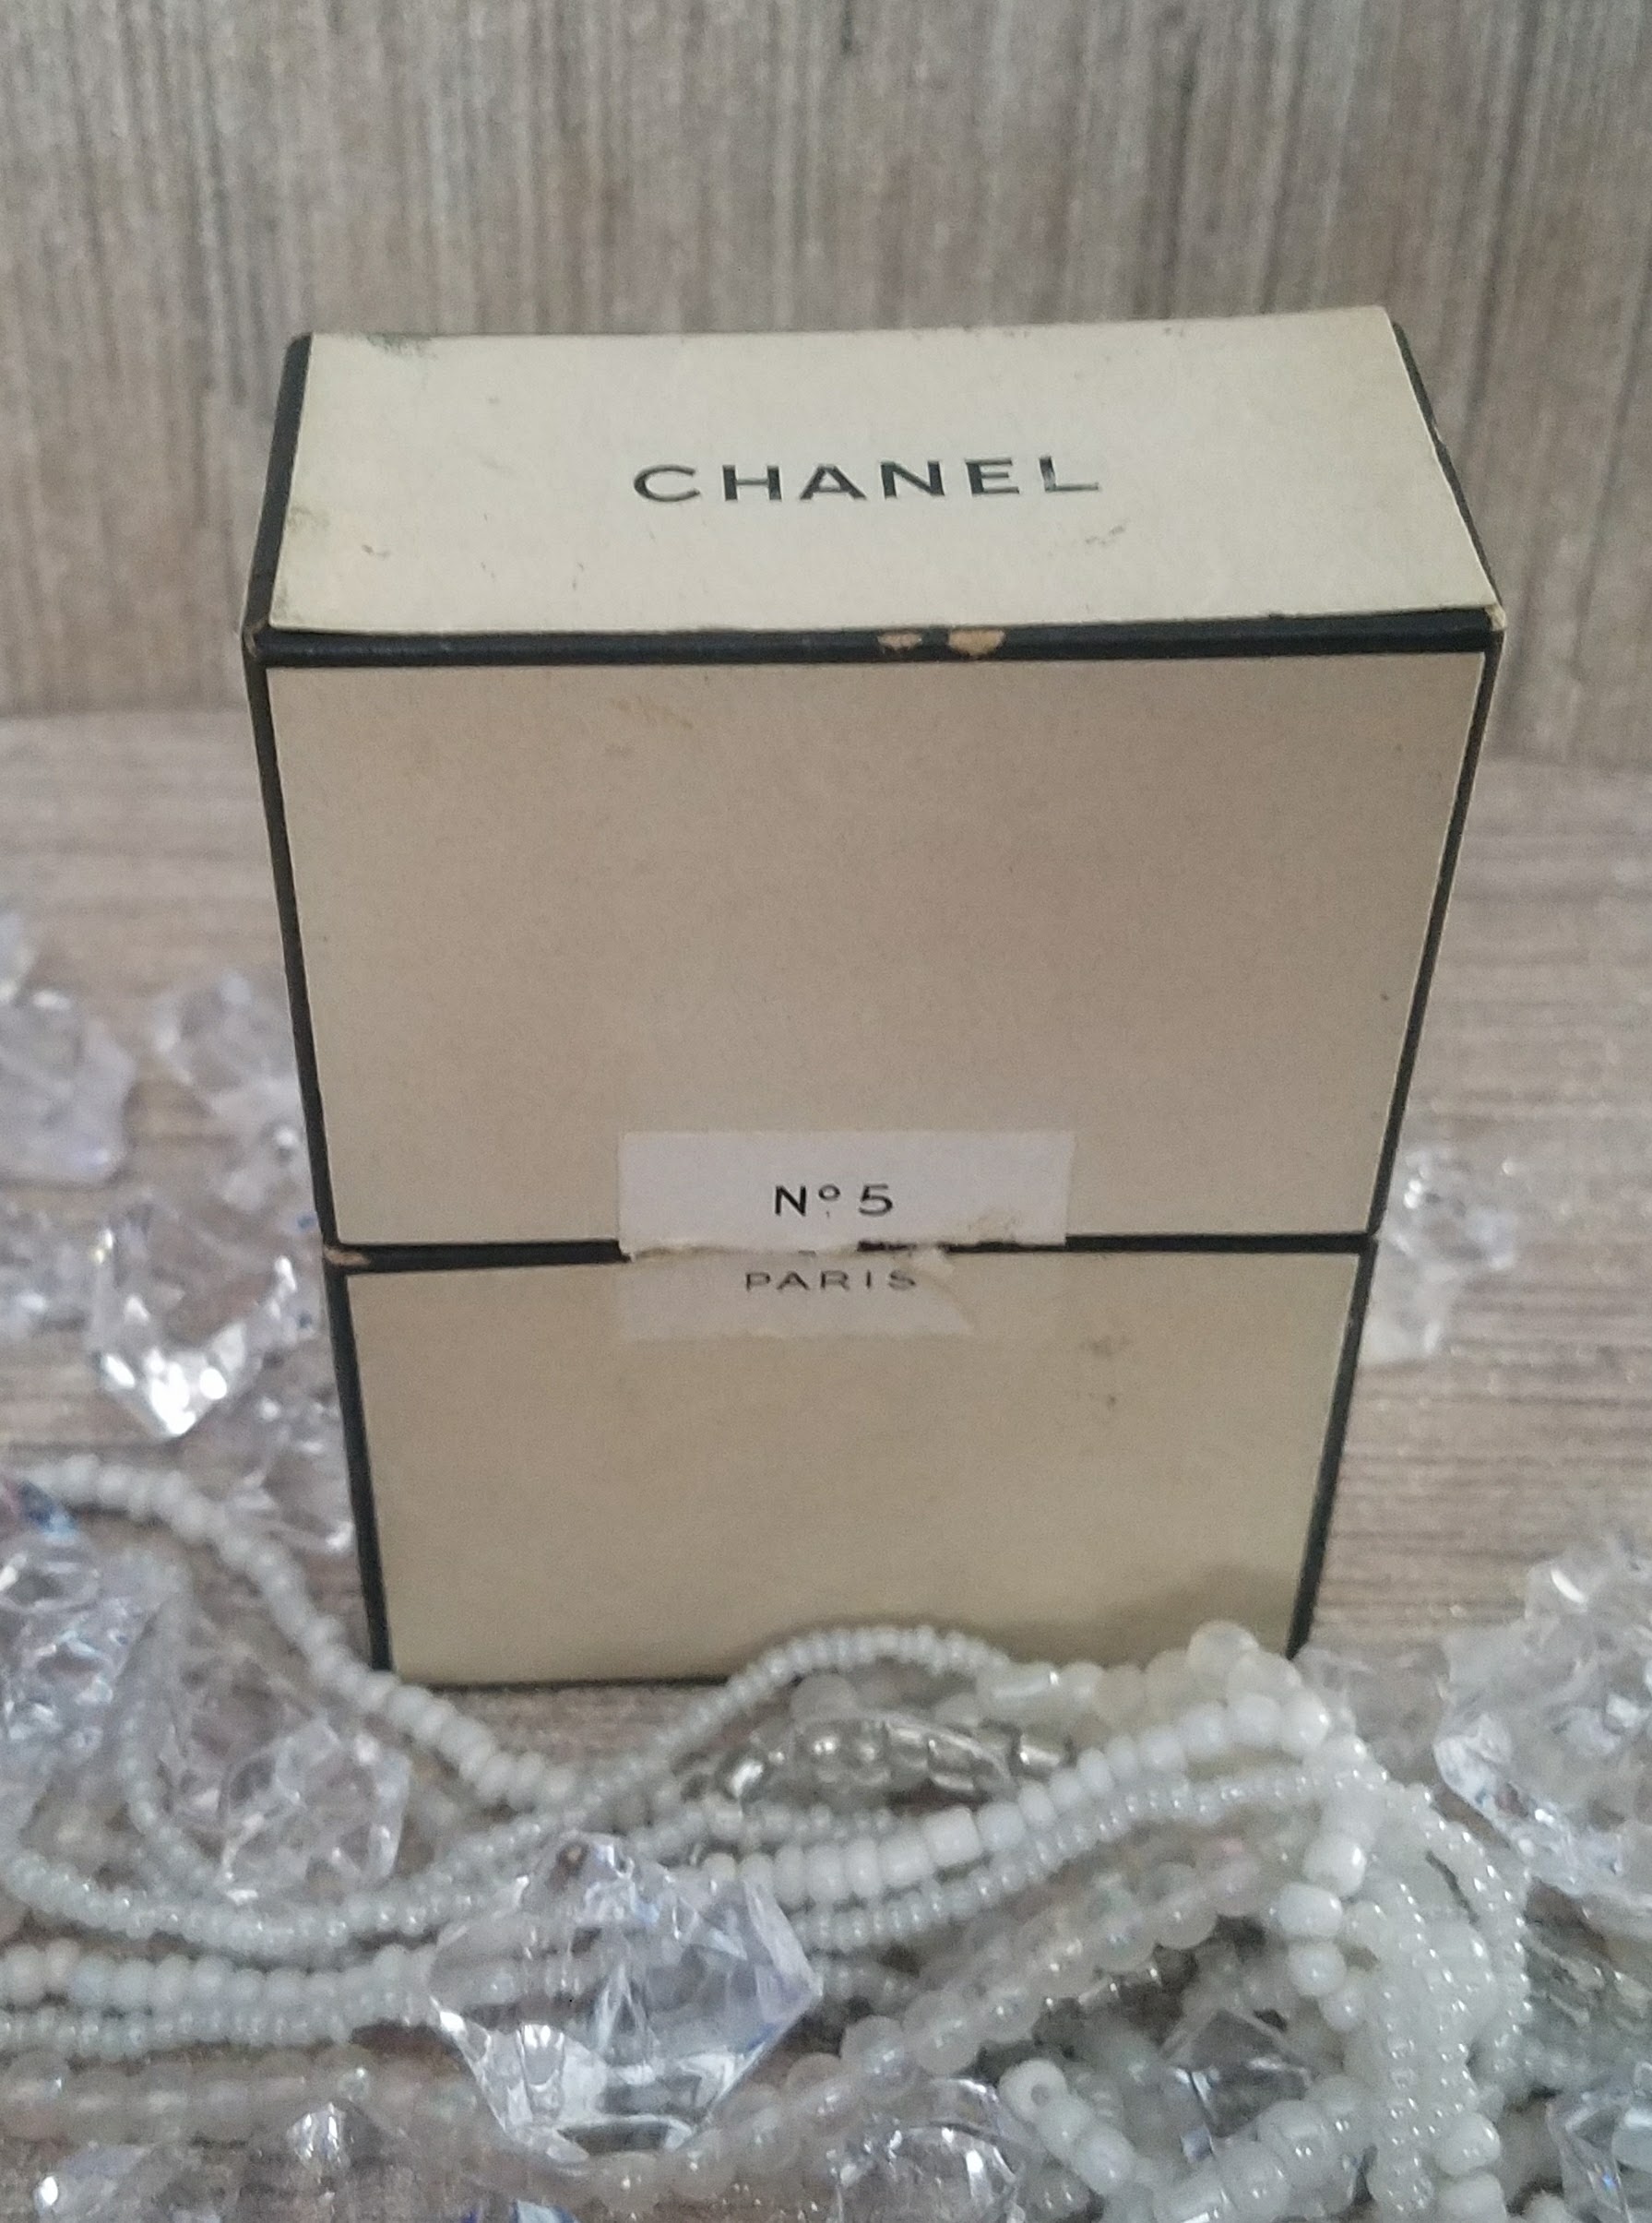 VINTAGE BOX SETS OF CHANEL AND LANCOME PARFUM in Canada